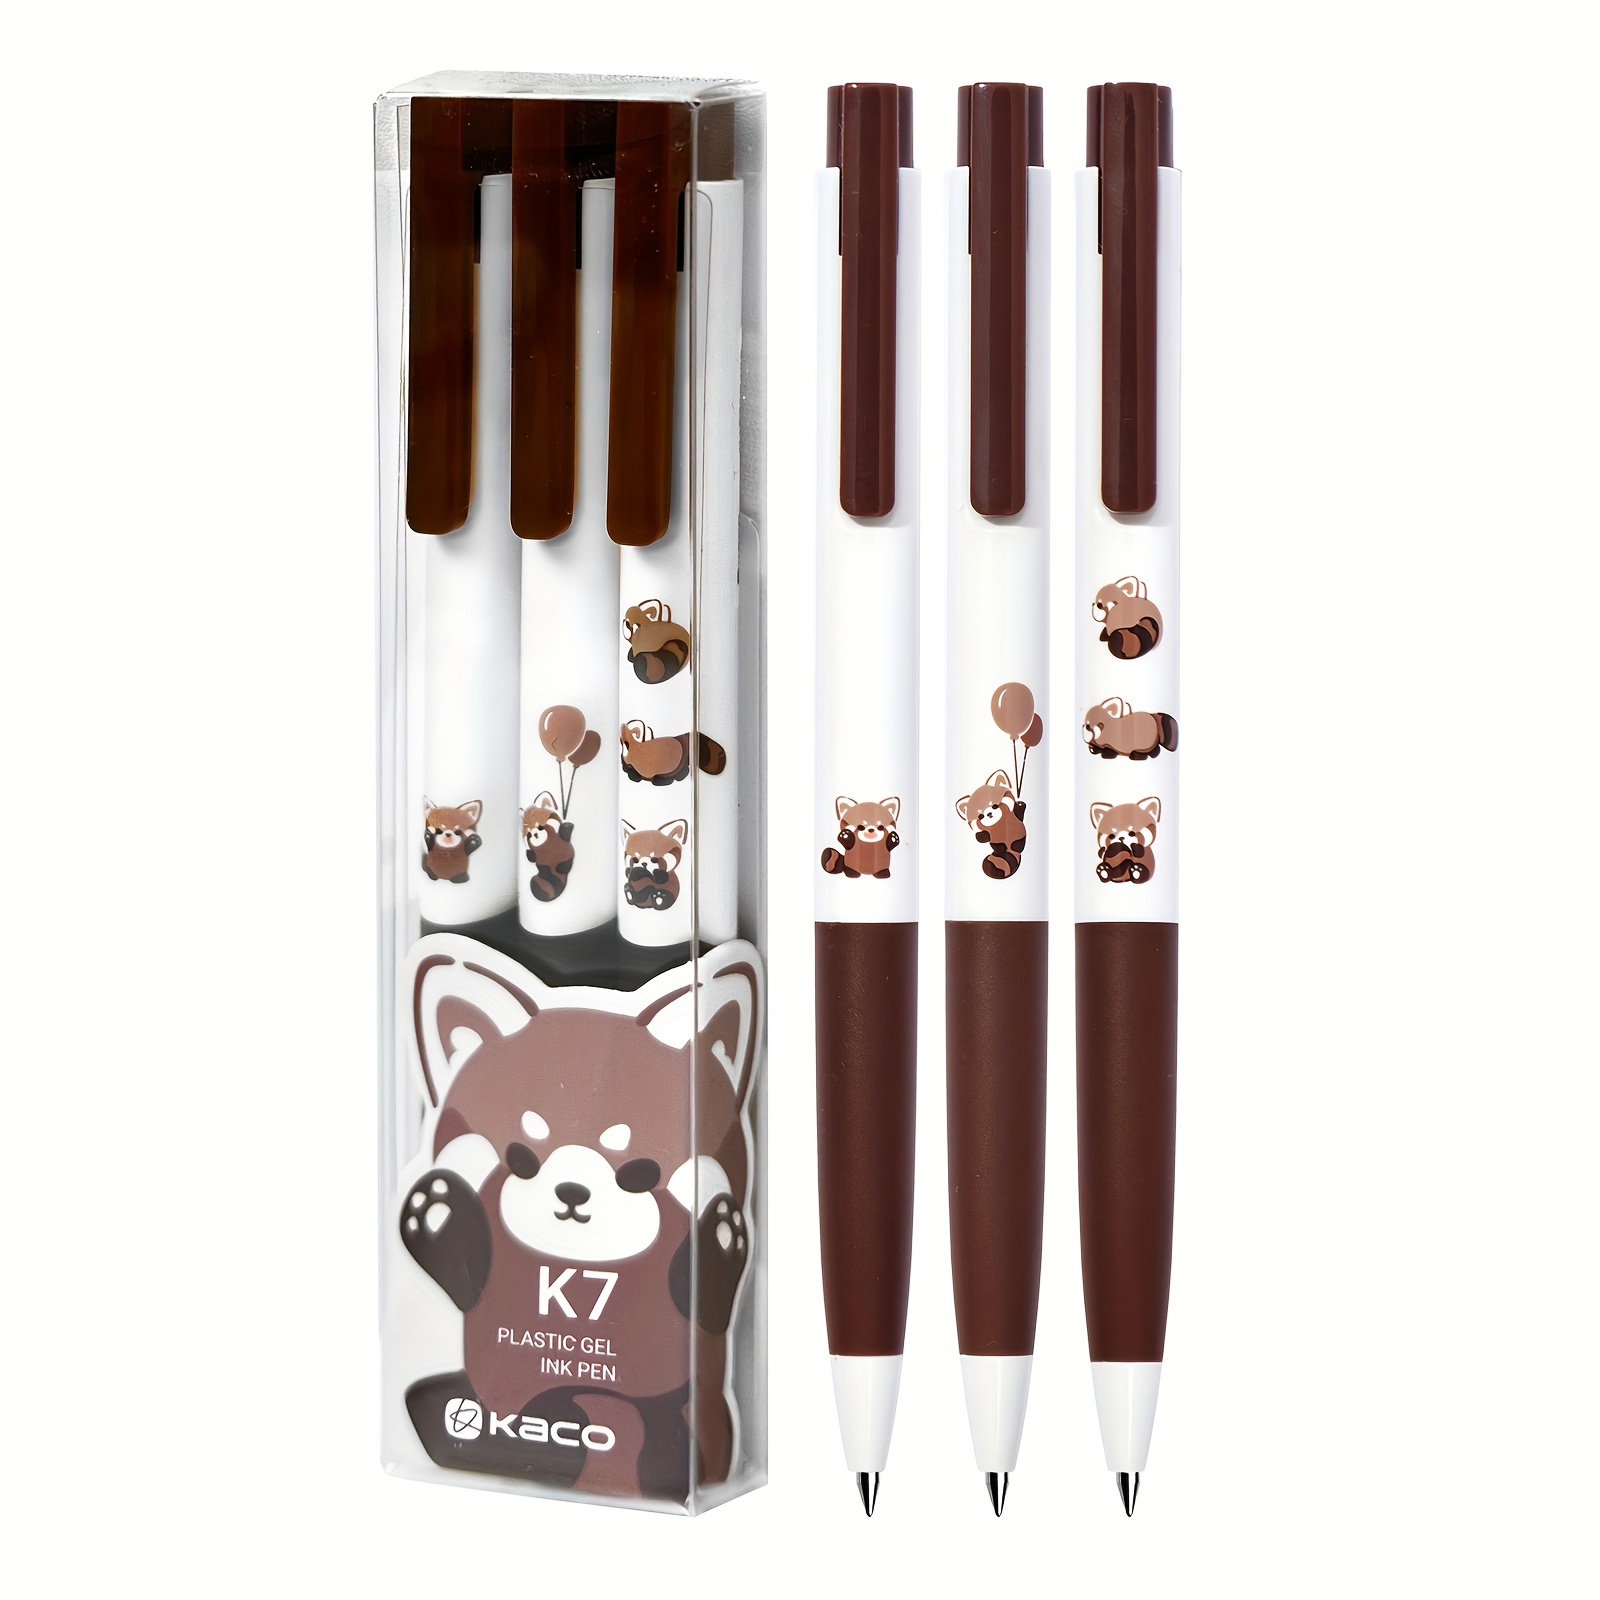 

Kaco K7 Gel Pens Cute Red Panda Original Design, 3 Pieces Set, School Office Supplies Stationary Christmas Gifts Idea No Bleed & Smear, Retractable Aesthetic Journaling Pens Smooth Writing